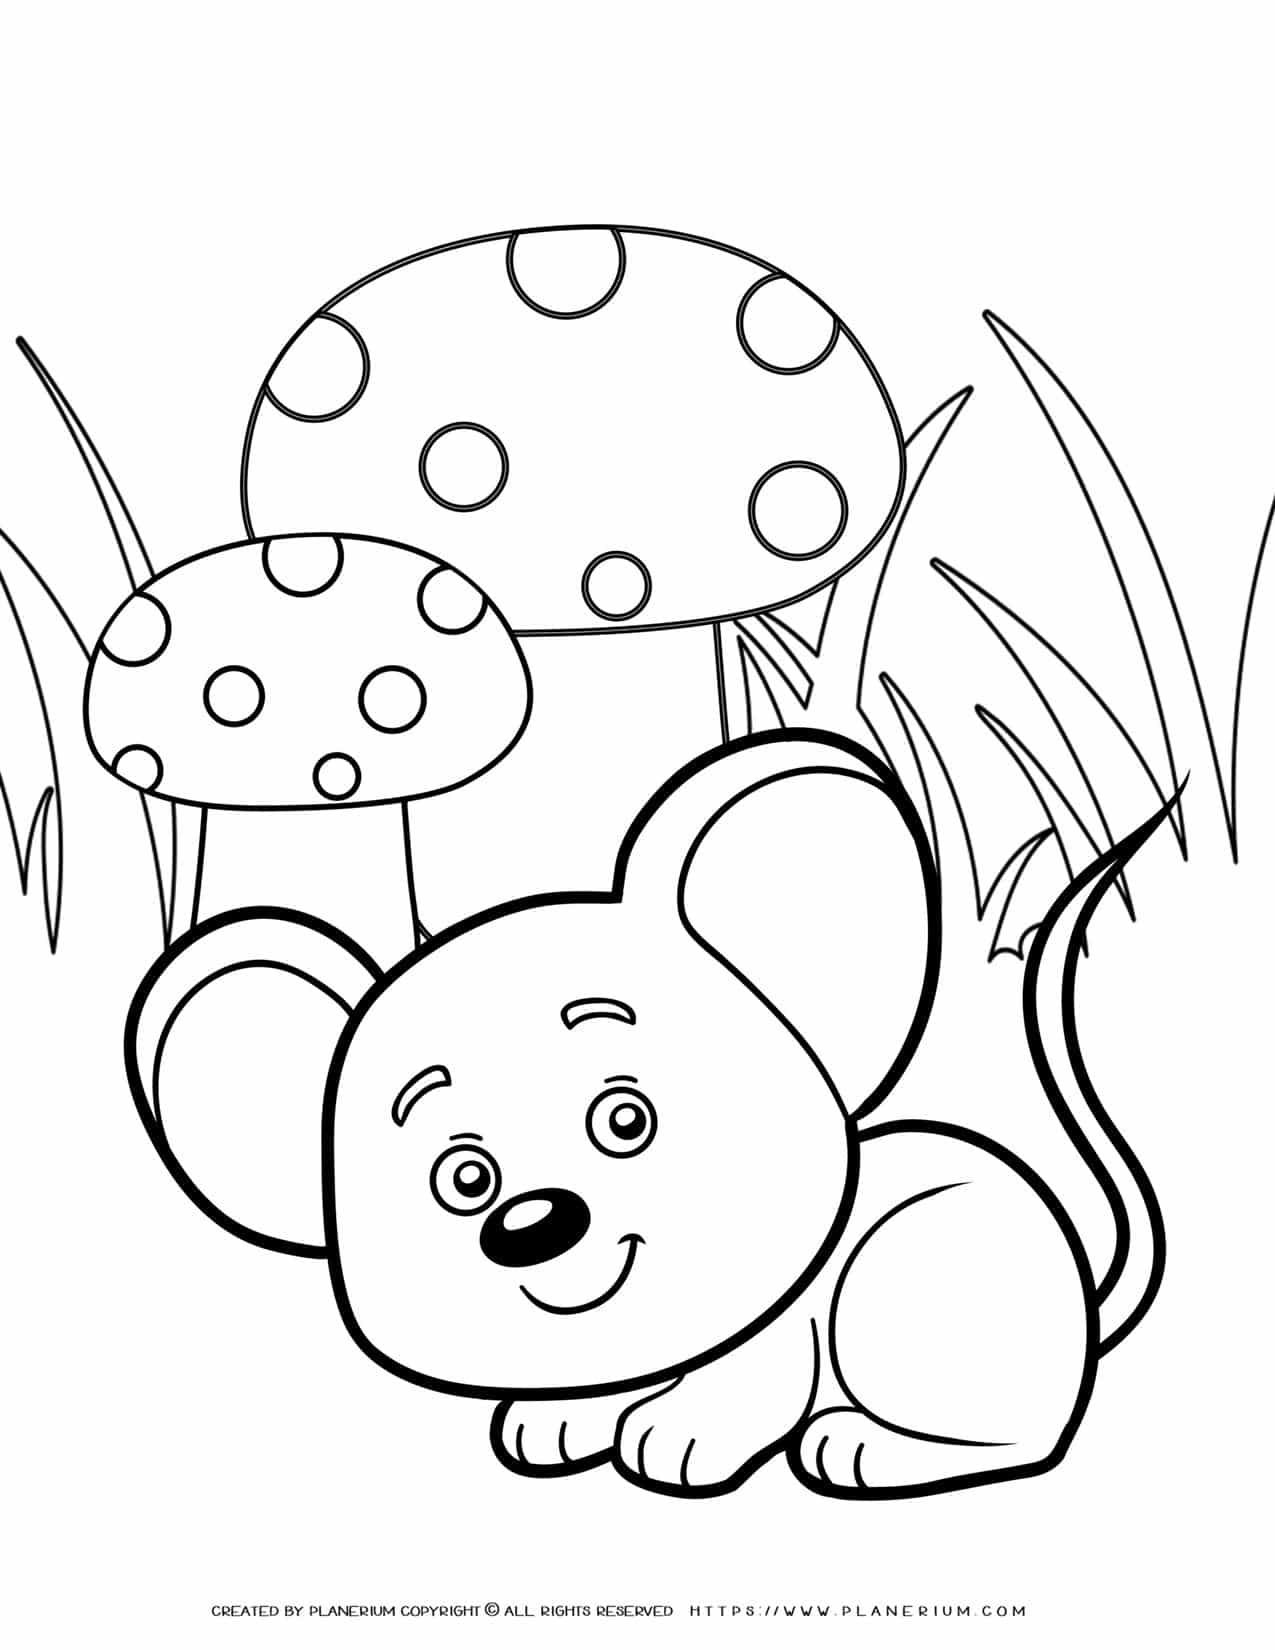 Animals Coloring Page - Mouse | Planerium